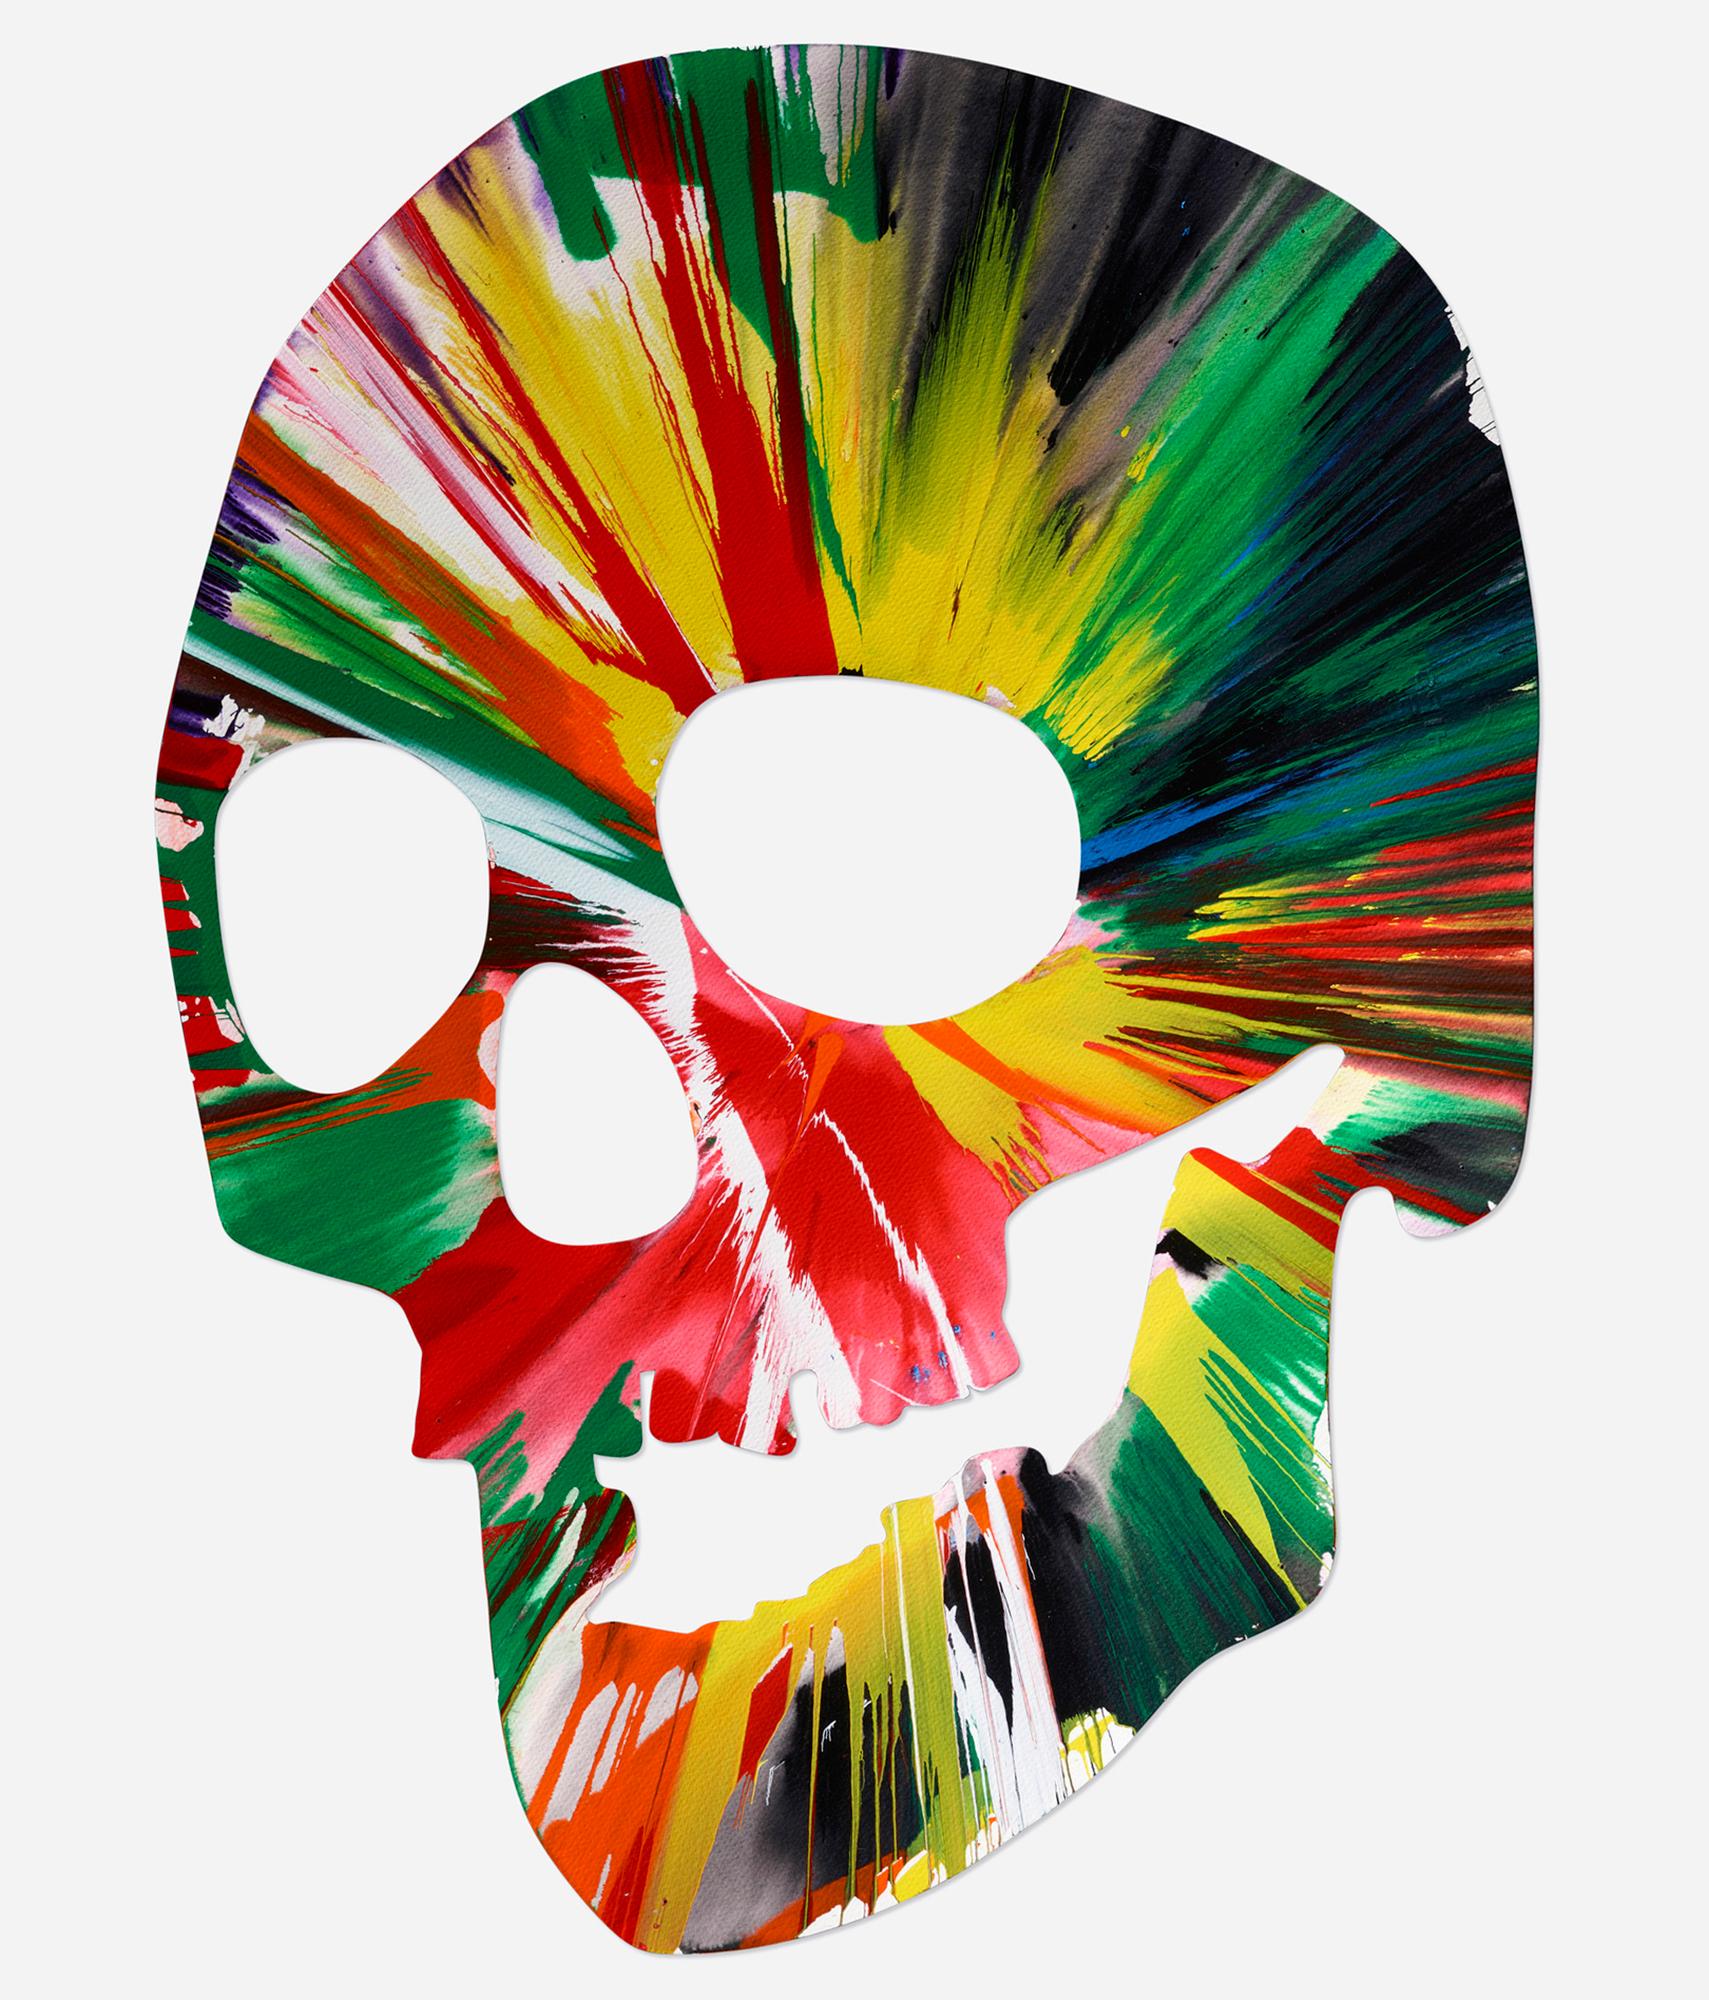 Damien Hirst Spin Painting (Damien Hirst Skull spin painting) For Sale 1